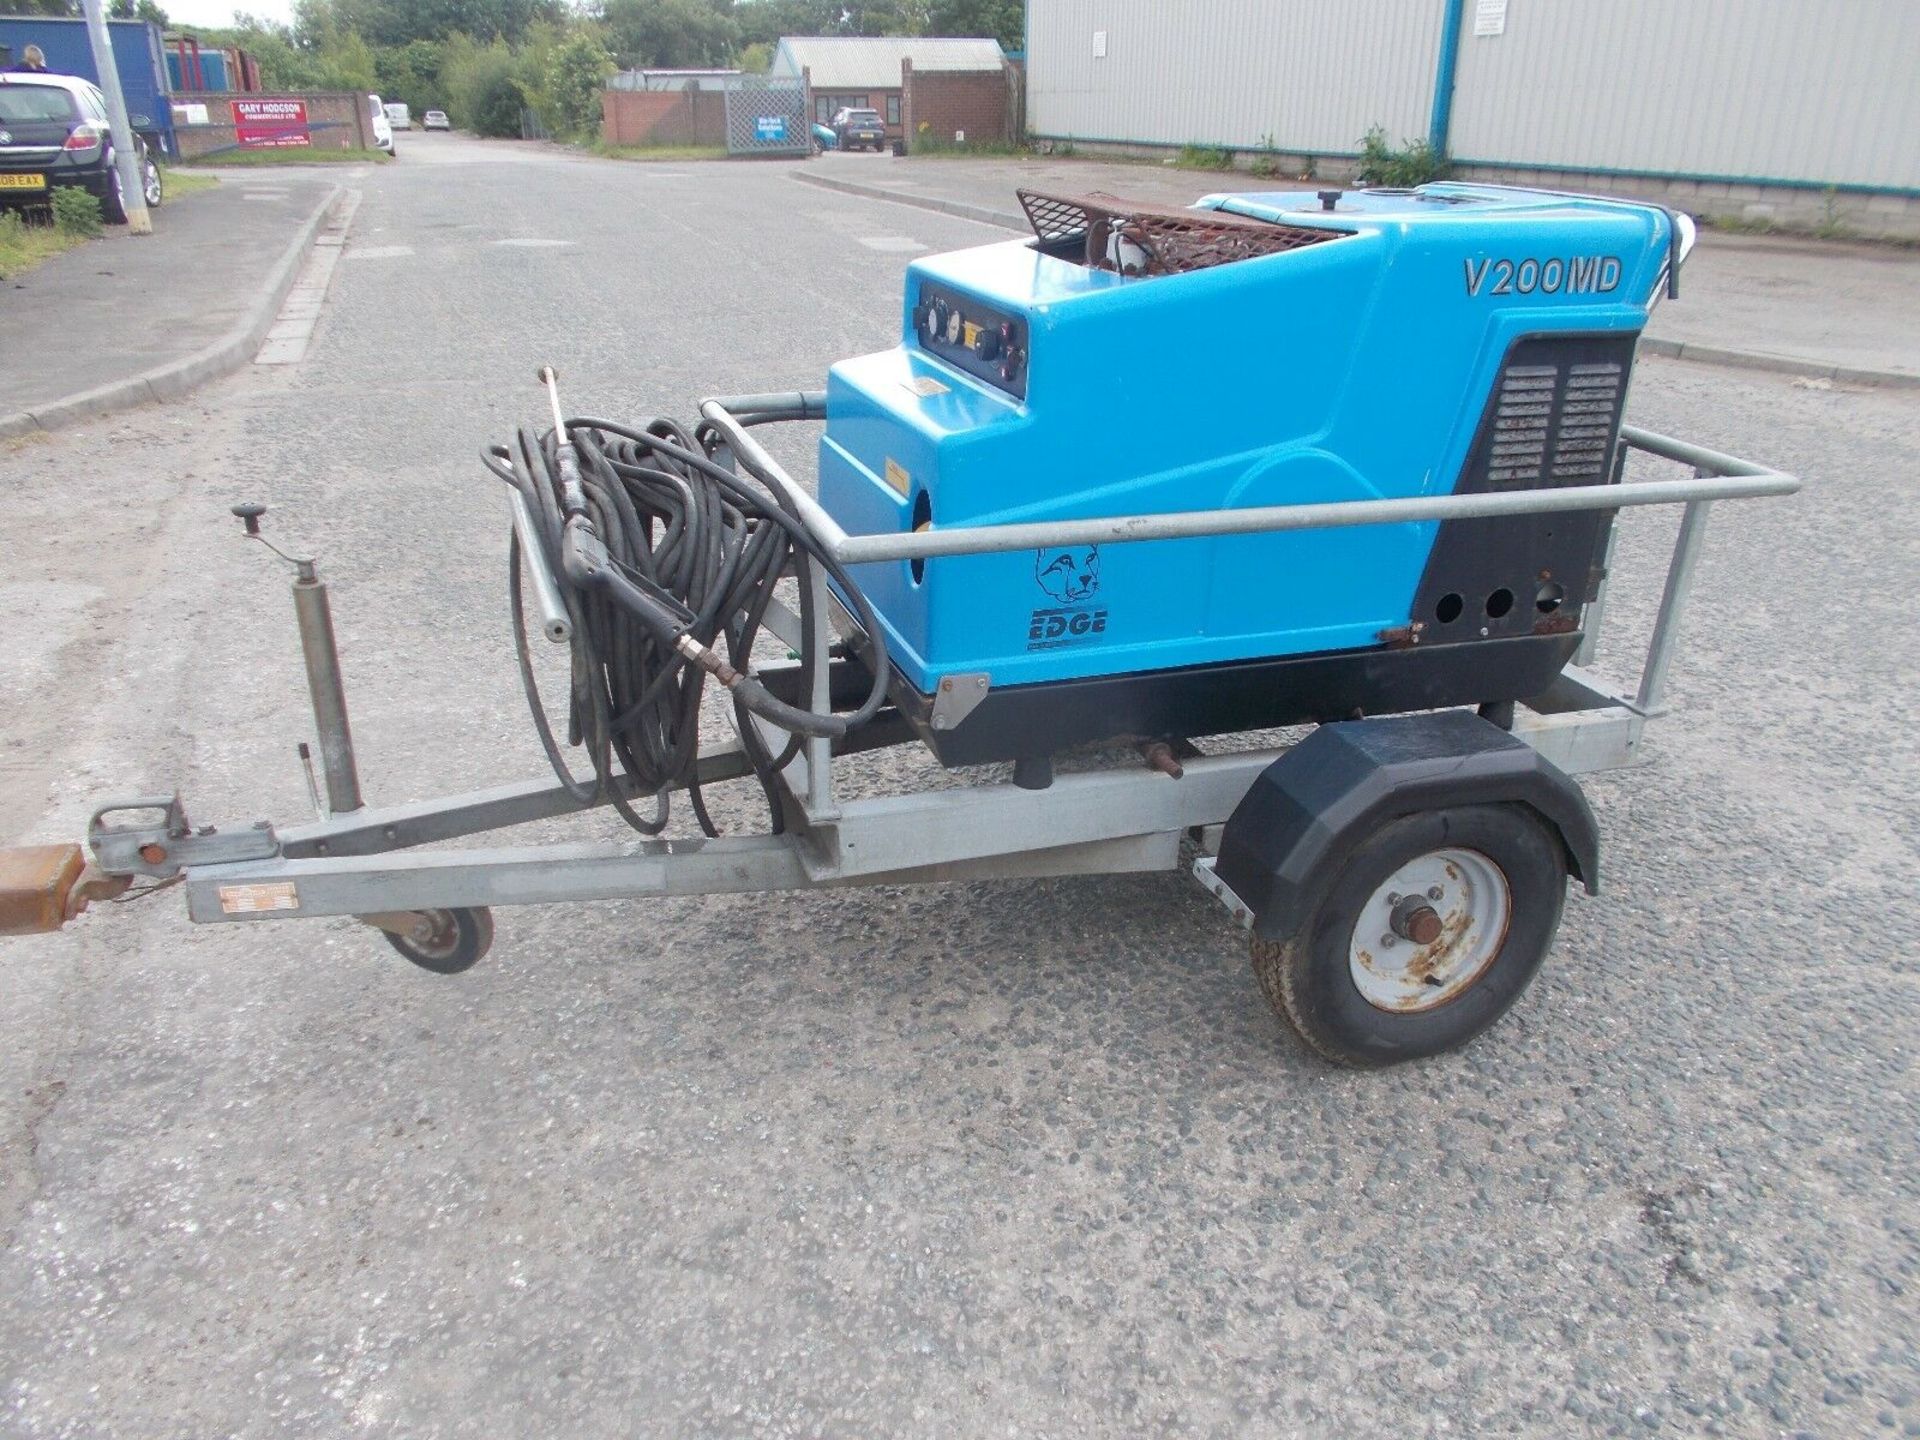 Edge V 200 MD Towable Hot and Cold Diesel Engined Pressure Washer - Image 7 of 7